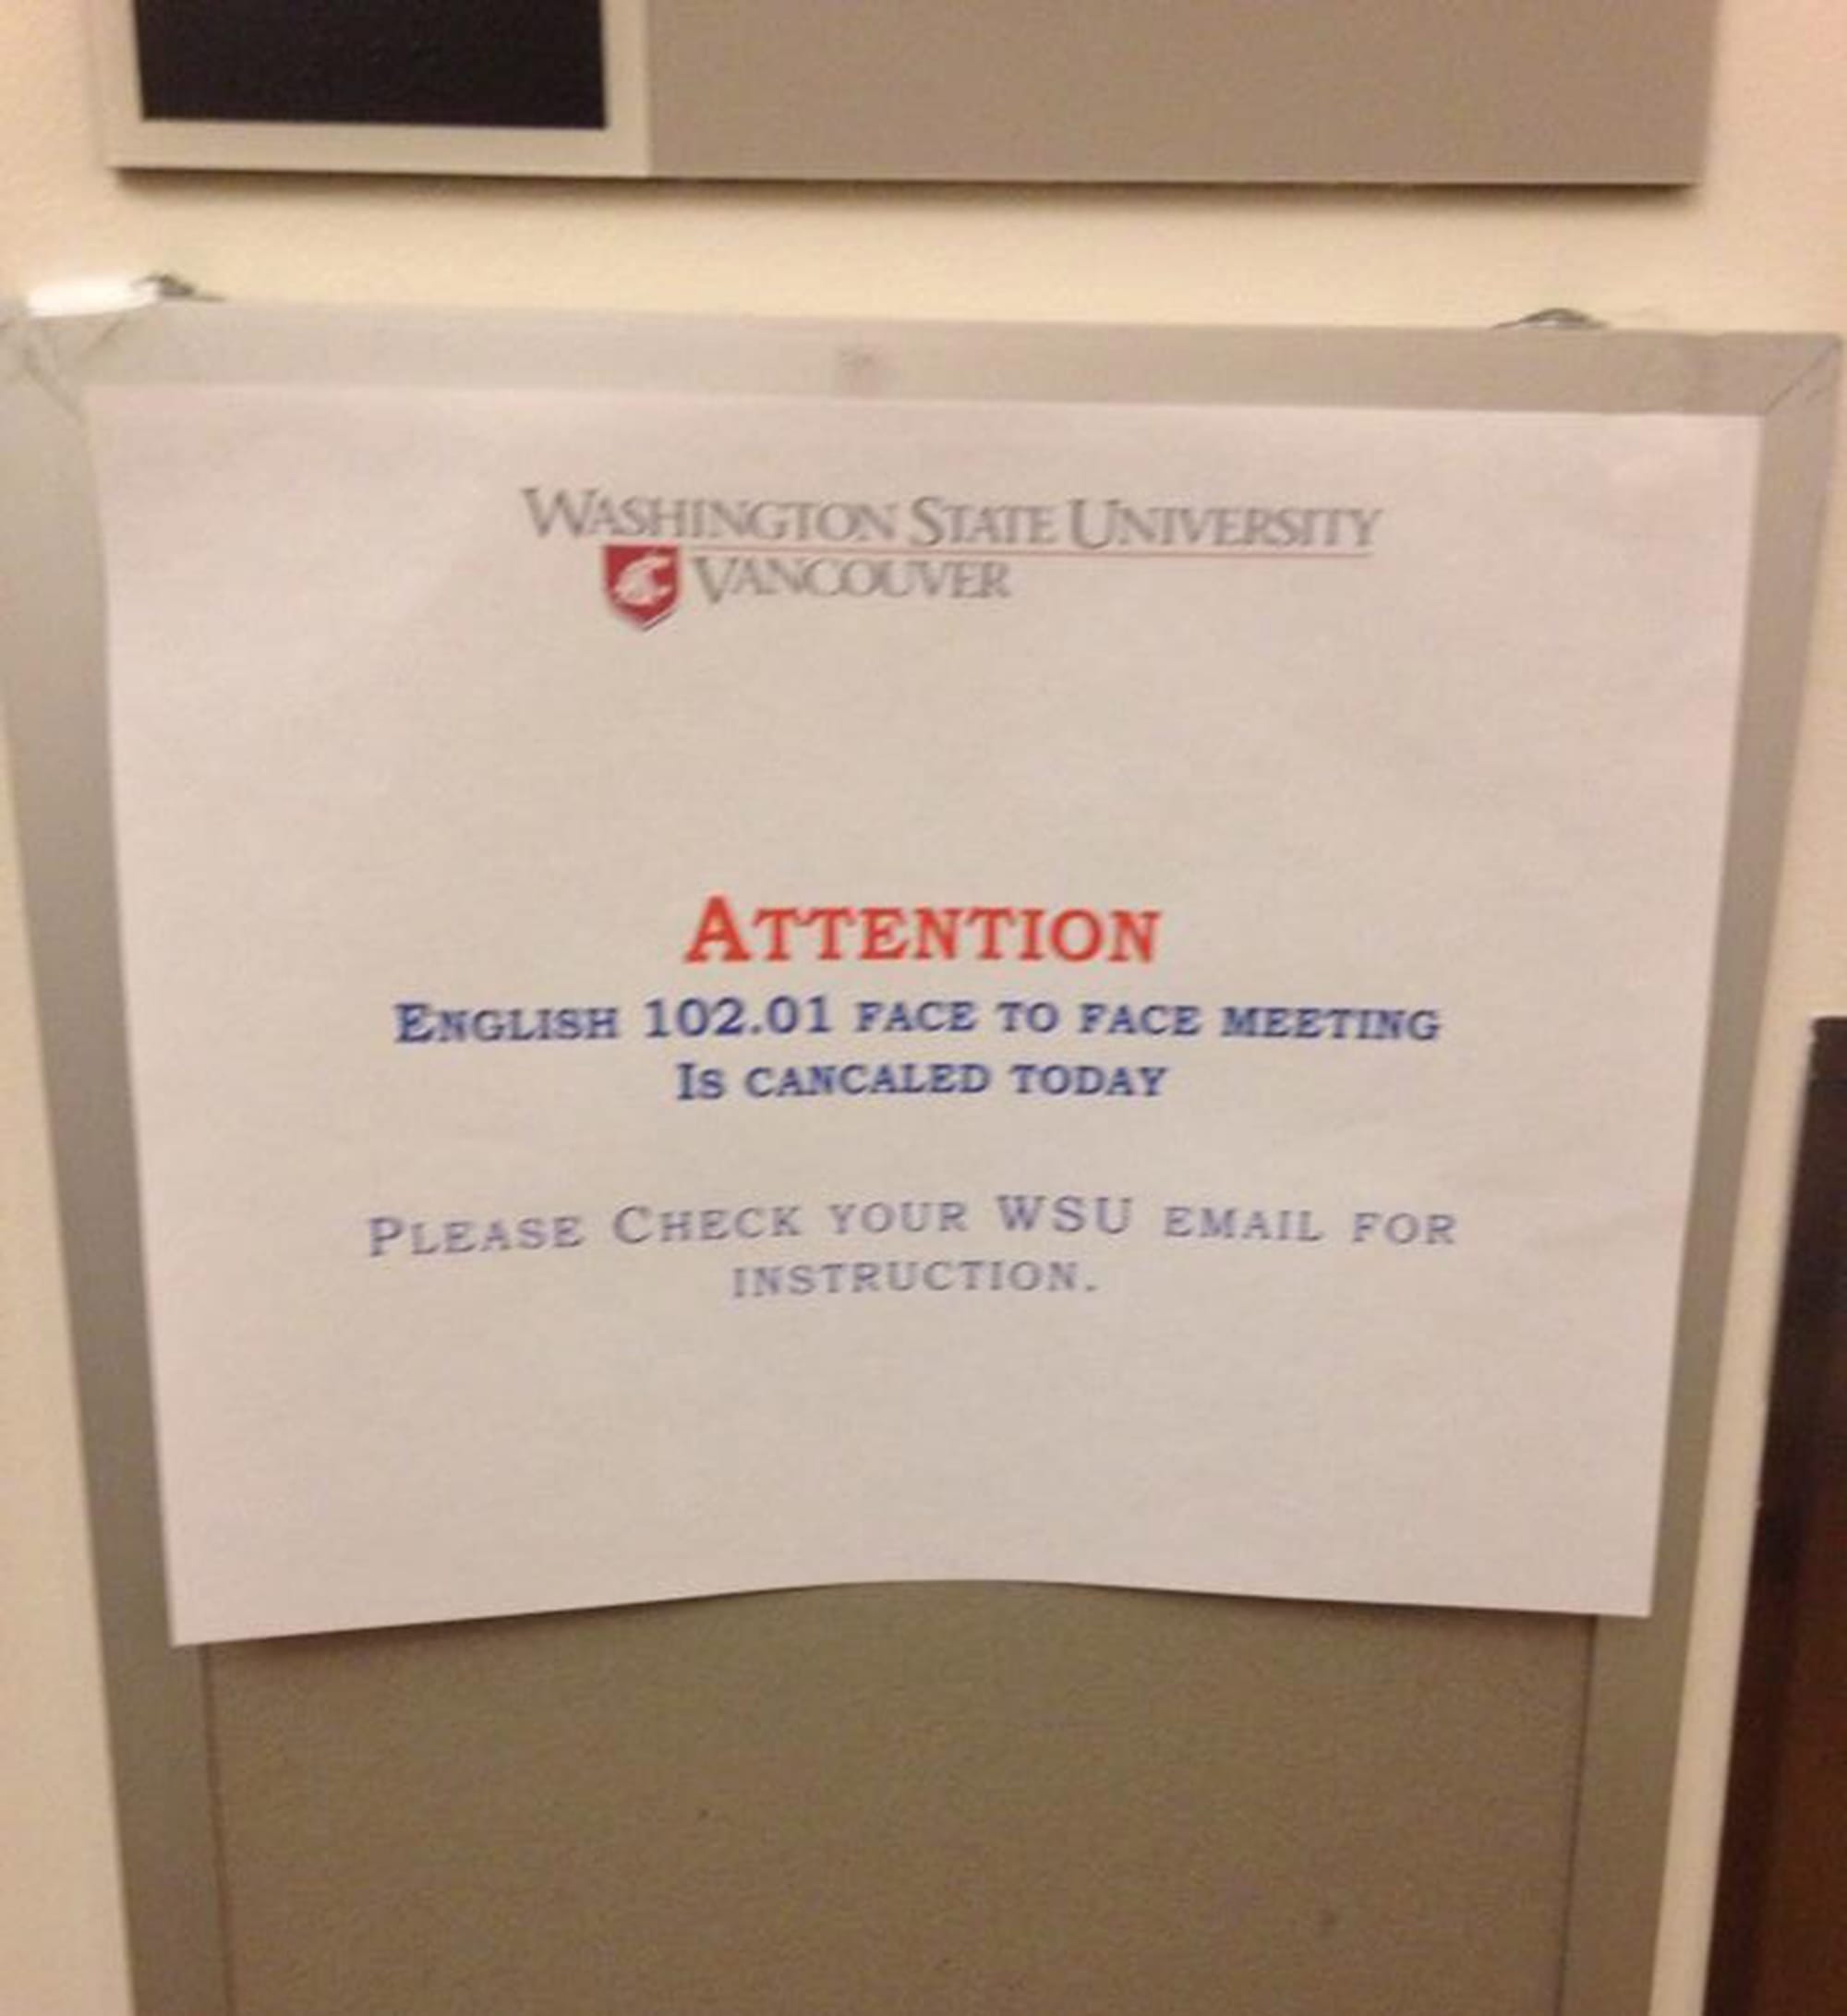 Student provided photo
Doesn't spelling count in college? Monday this note alerted WSU Vancouver students that their English class was &quot;cancaled.&quot;